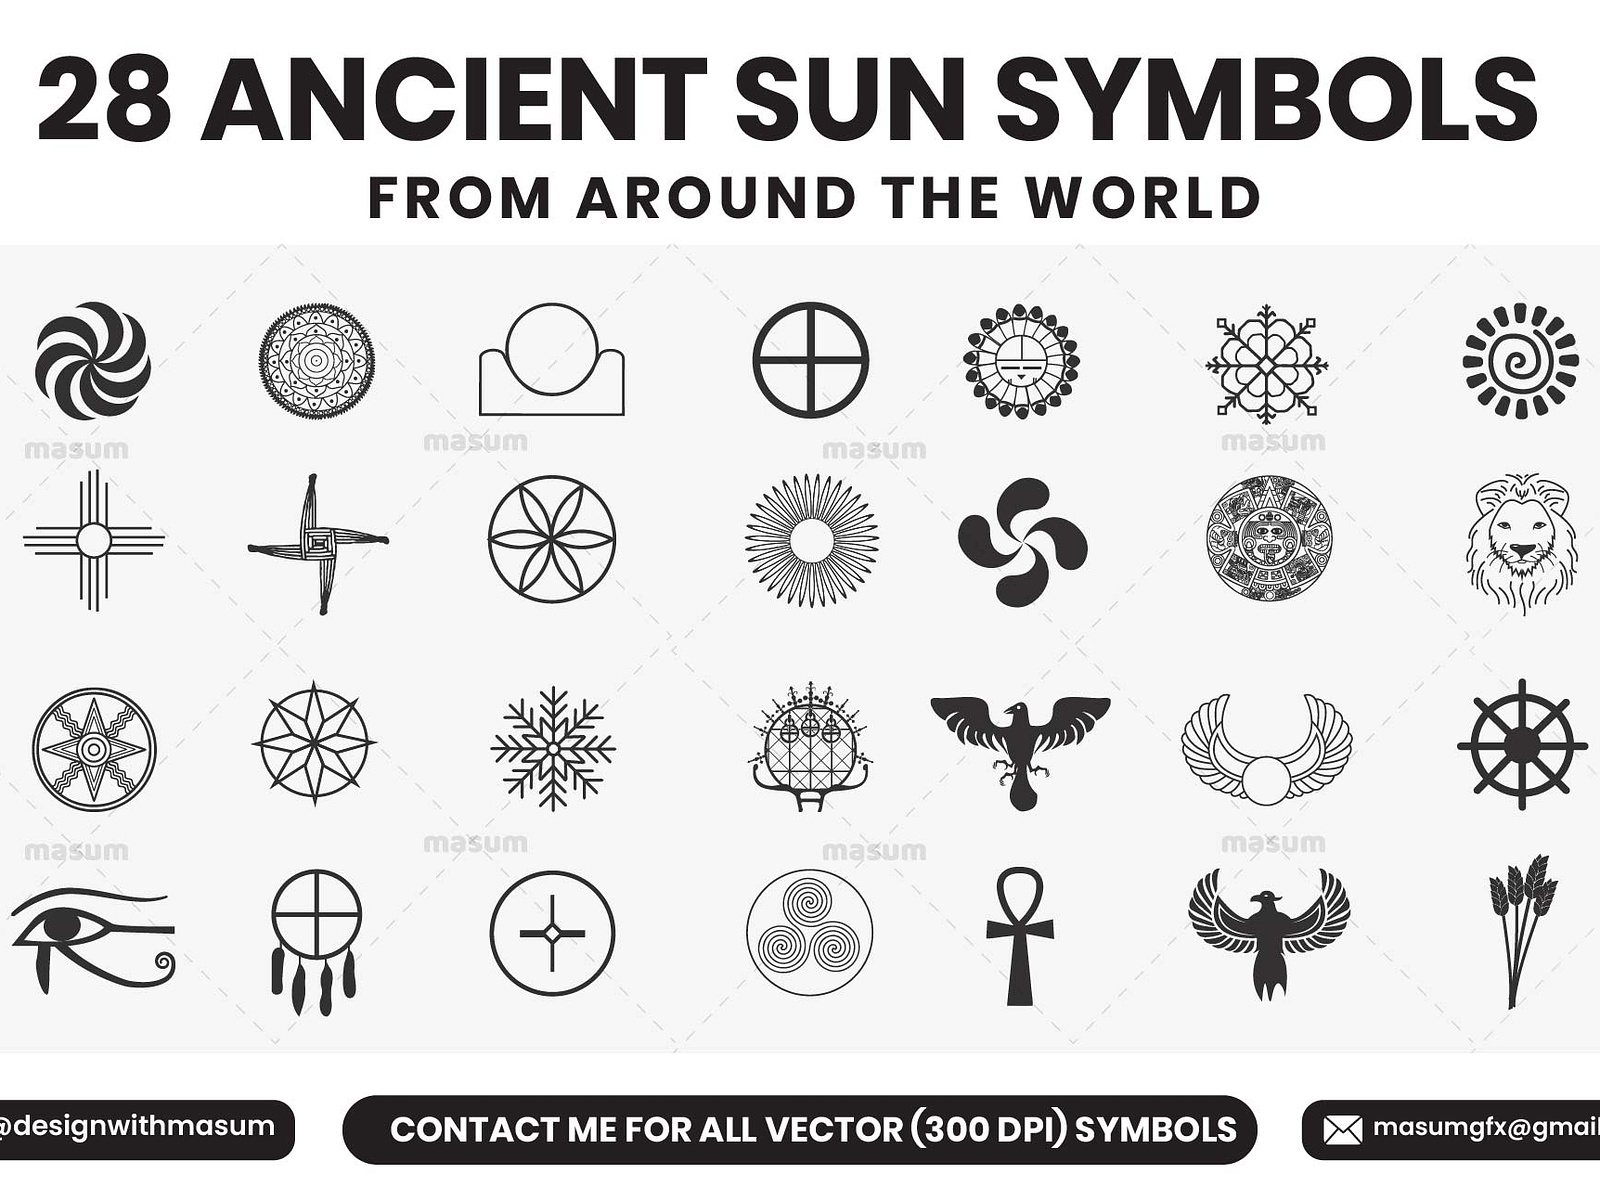 28 ancient sun symbols from around the world by Grapixus on Dribbble